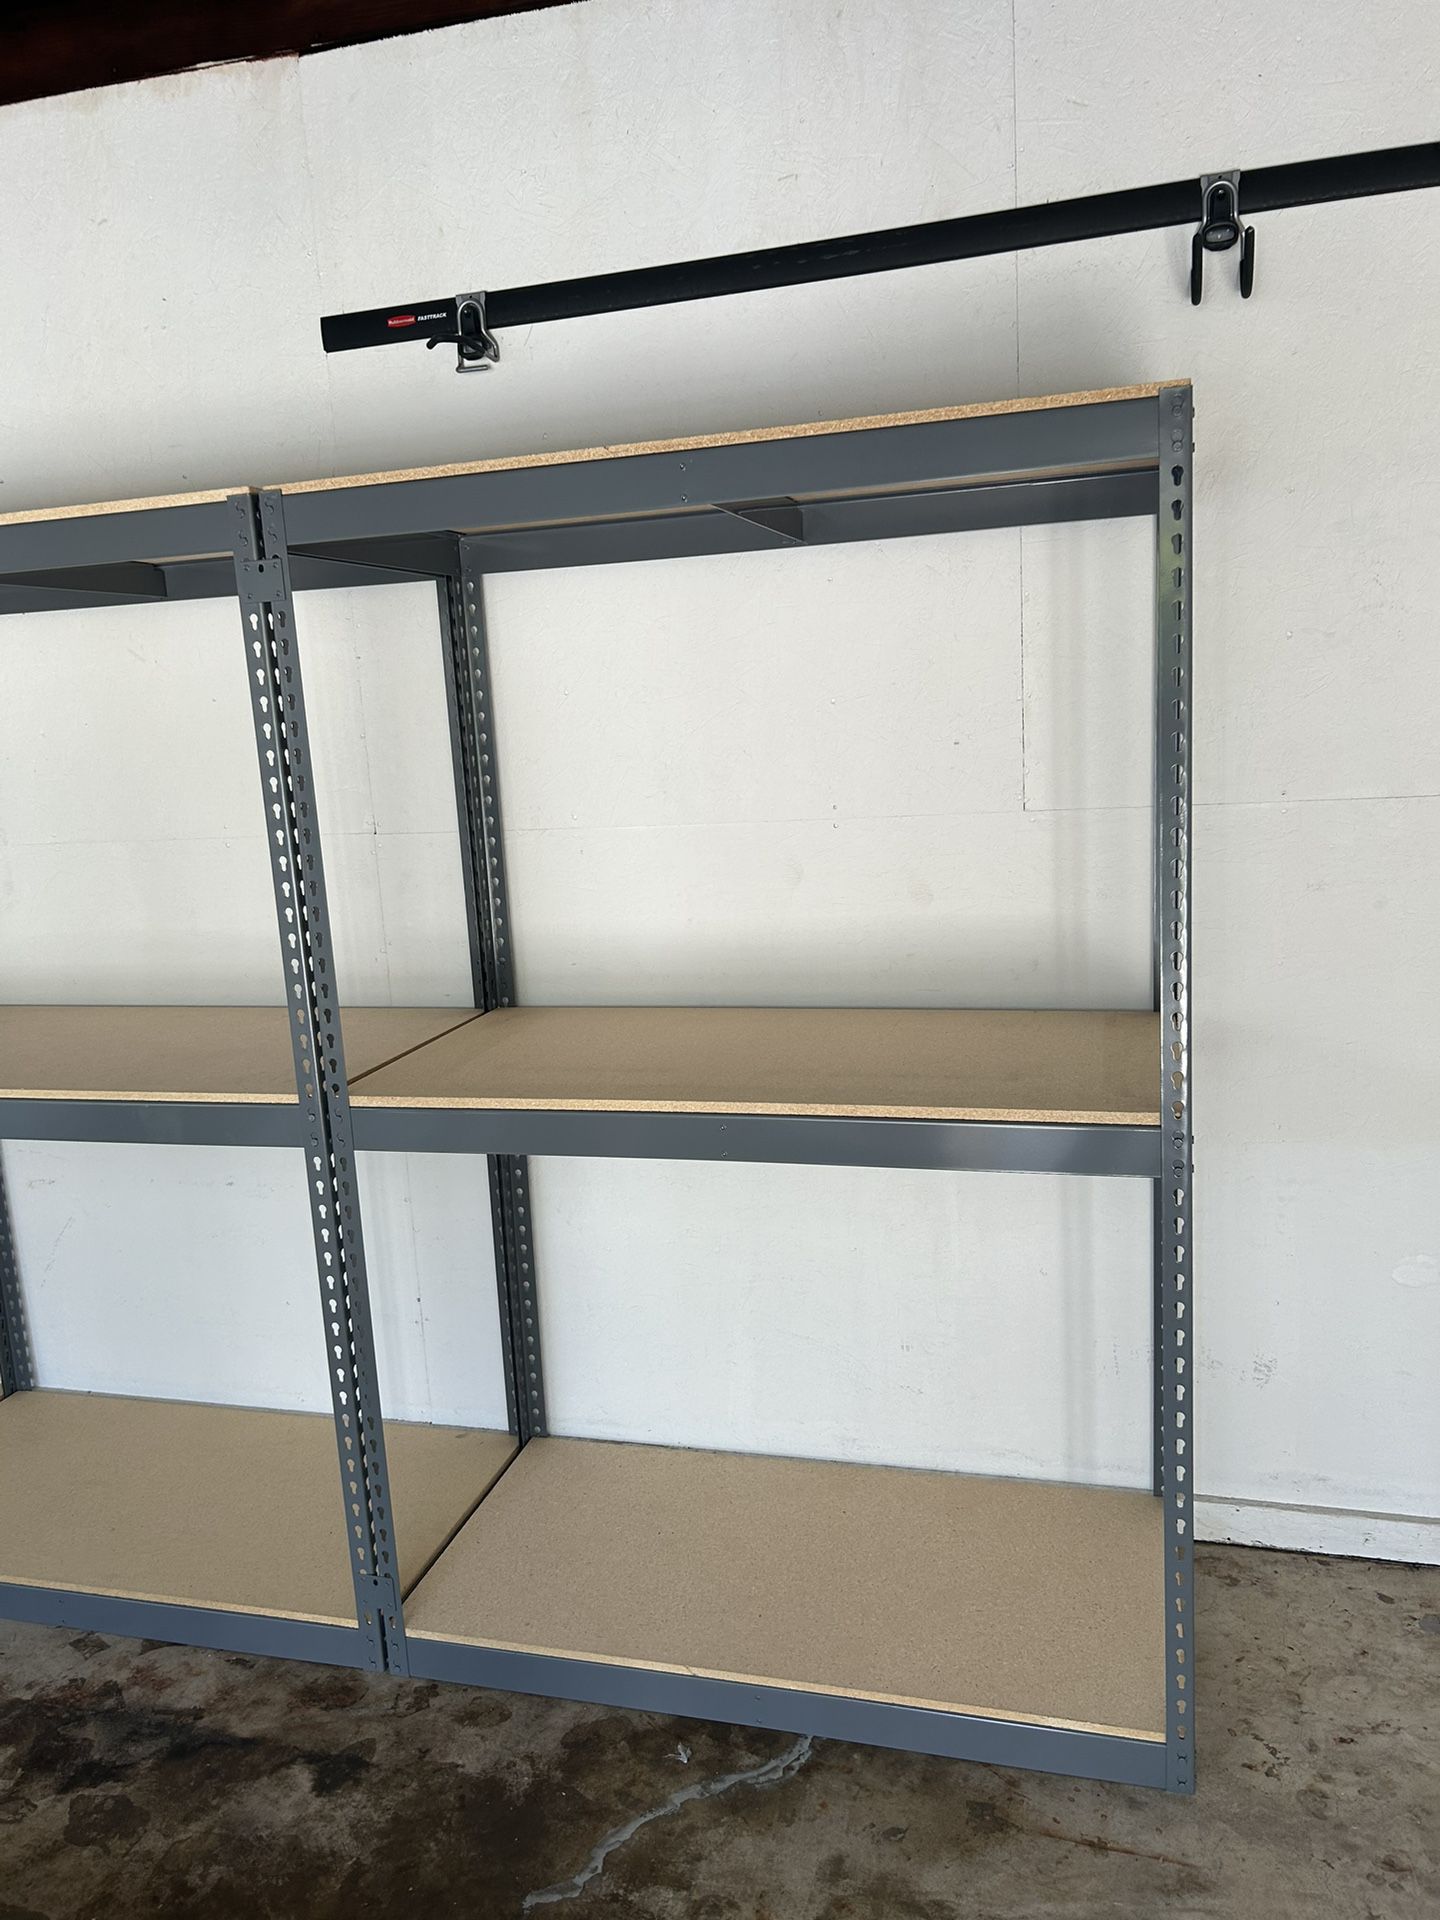 Garage Shelving 48 in W x 24 in D New Industrial Boltless Warehouse Racks stronger than Homedpot Lowes Costco Delivery Available